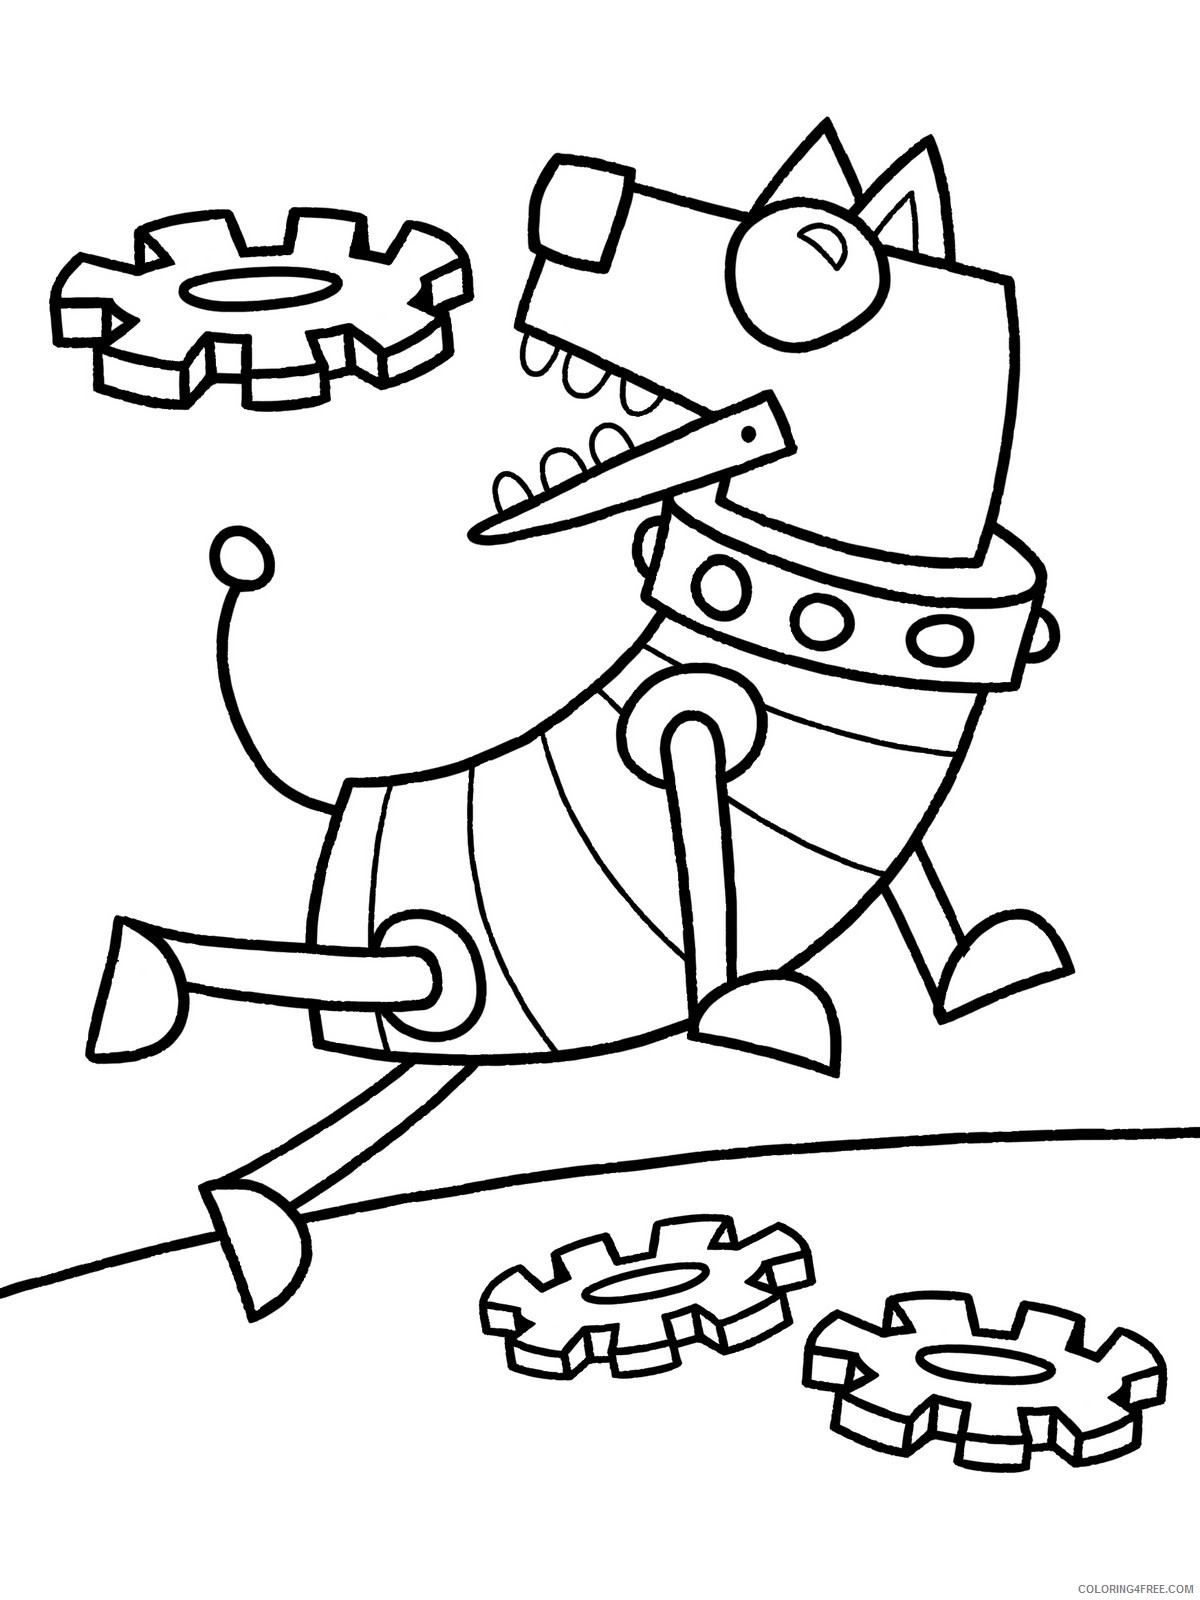 dog robot coloring pages Coloring4free